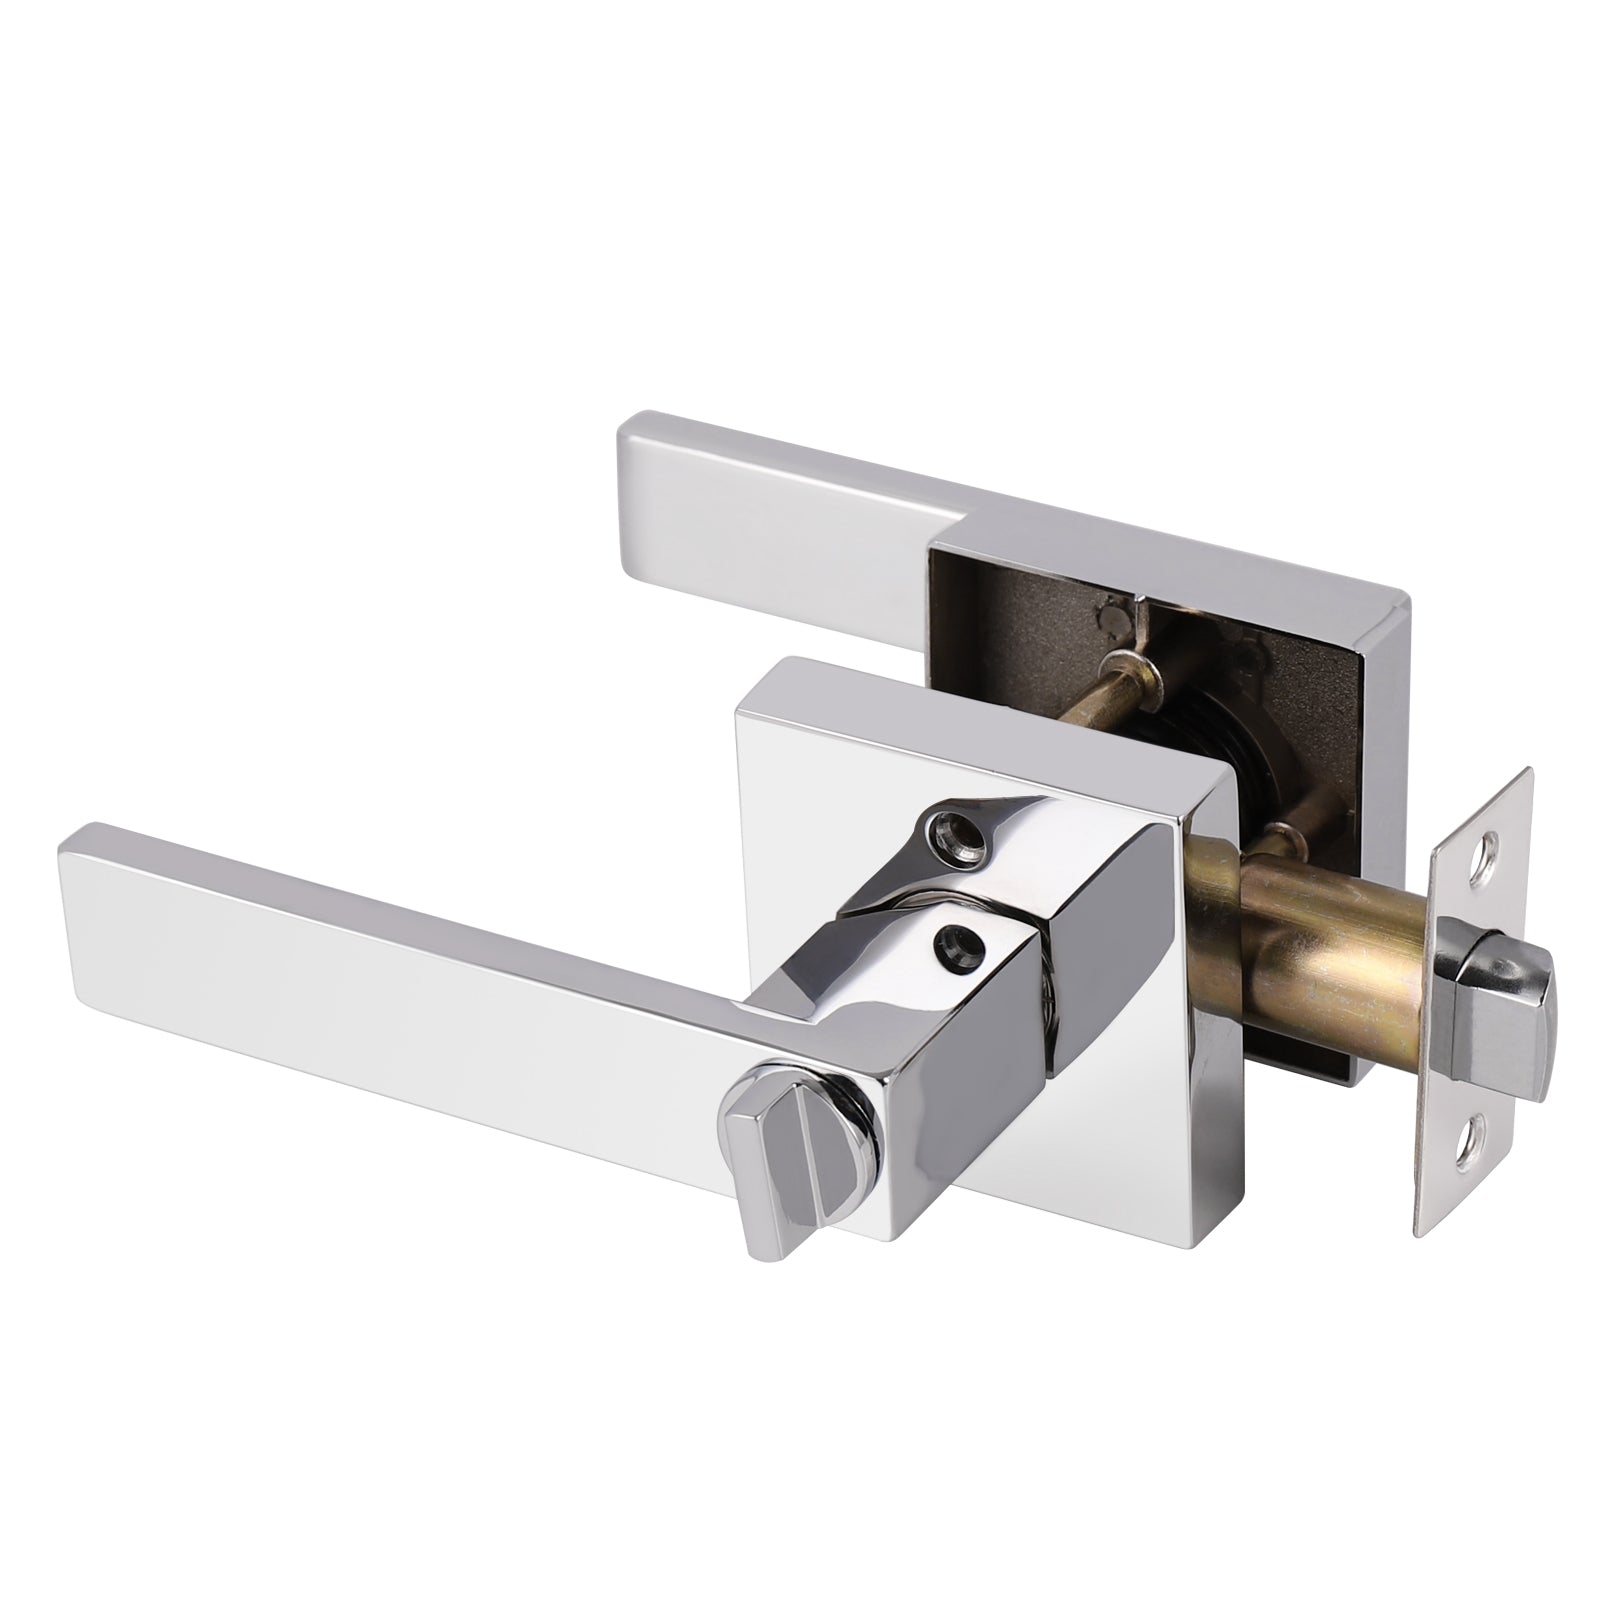 Heavy Duty Privacy Door Handles with Square Design, Polished Chrome Finish DL01PCBK - Probrico